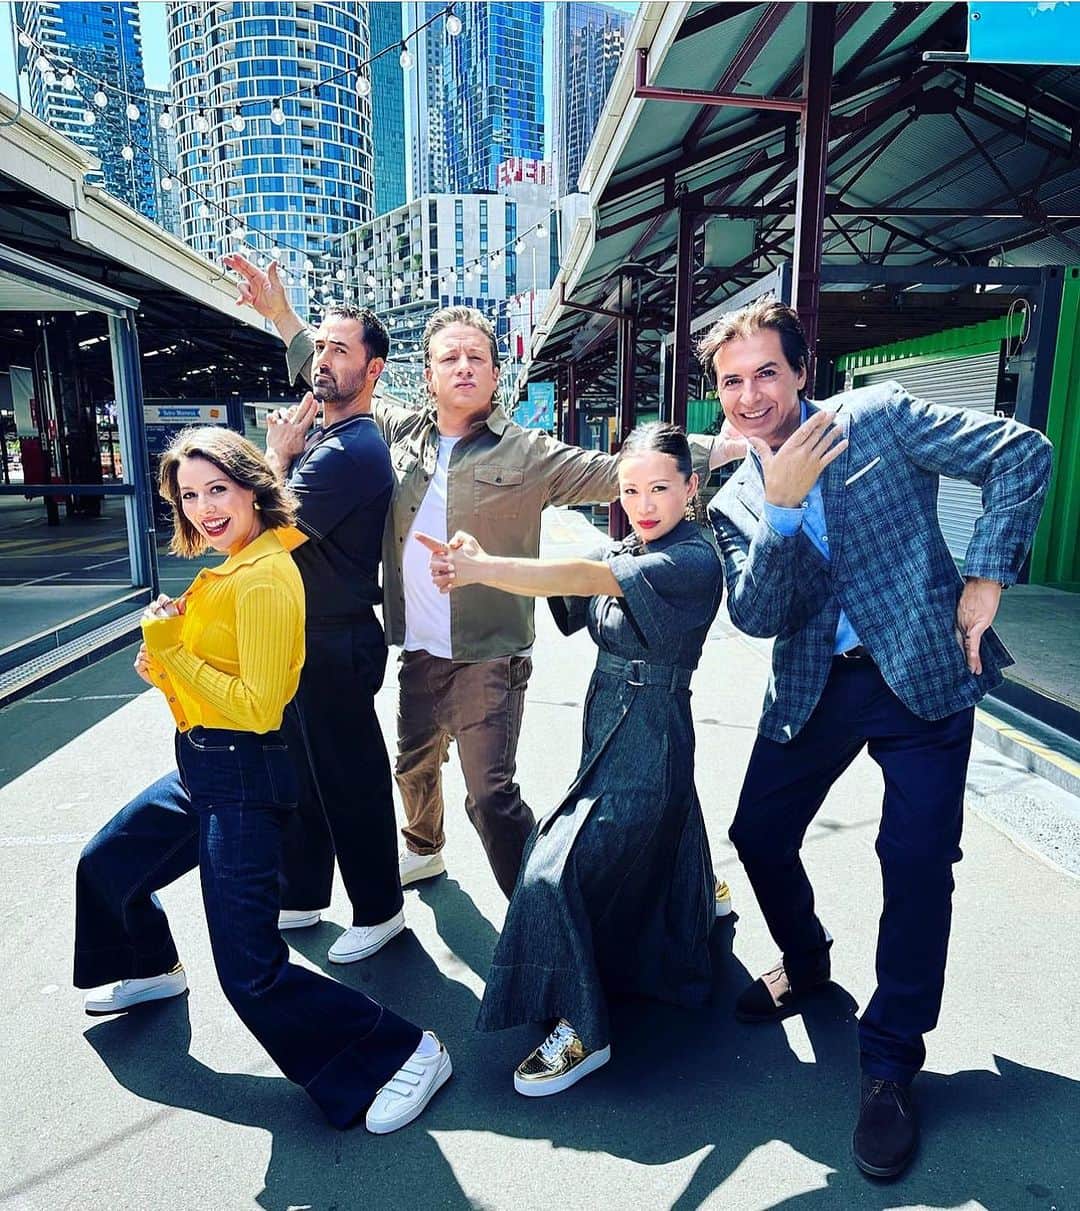 ジェイミー・オリヴァーのインスタグラム：「This is a long one Australia…With a very heavy heart I leave the @masterchefau family in the beautiful city of Melbourne after two amazing and busy weeks of filming. This year was always going to be very very hard with the incredibly sad loss of Jock something that shocked the nation, the hole he has left is vast and irreplaceable. Jock was a one off, a legand and a great man…..As they say, the show must go on, I wanted to reassure you in Aussi that I personally believe the MC Team have moved forward in a way that feels right… I really wanted to be there to support my mate @andyallencooks who really is as brilliant as you think he is, I love him as much as I do Australia…which is a lot! Supporting Andy you’ve got some amazing new judges. The most joyful creative human and ex contestant @pohlingyeow is simply a ray of sunshine with so much to give everyone especially the contestants♥️, then @jeanchristophe_novelli wow! Very funny, kind, culinary romantic, wise, wonderful and a Michelin star chef that moved the London food scene and inspired me when I was young 🙏🏼 then the new girl on the TV block bringing a fresh dimension is the wonderful @sofiaklevin well she’s quite special, she’s researched and eaten her way around the world and has a way with words that really enthused both me and the contestants, she fitted in like a glove and gives completion to a mighty wholesome team of judges and mentors. And me, well I’m there when they need me, this time helping kick off the next season but I’ll be back if and when appropriate. The contestants this year are just wonderful and diverse in all their attributes….so Australia I promise you’re in good hands, expect the unexpected! Laughter and dreams being made, it’s going to be very special …..big love to all the MC production crew, you’re all world class at your jobs making the best show and I’m so blessed to be part of it. Thanks for looking after me, big love to all. Jamie O xx @zonfrillo xx」